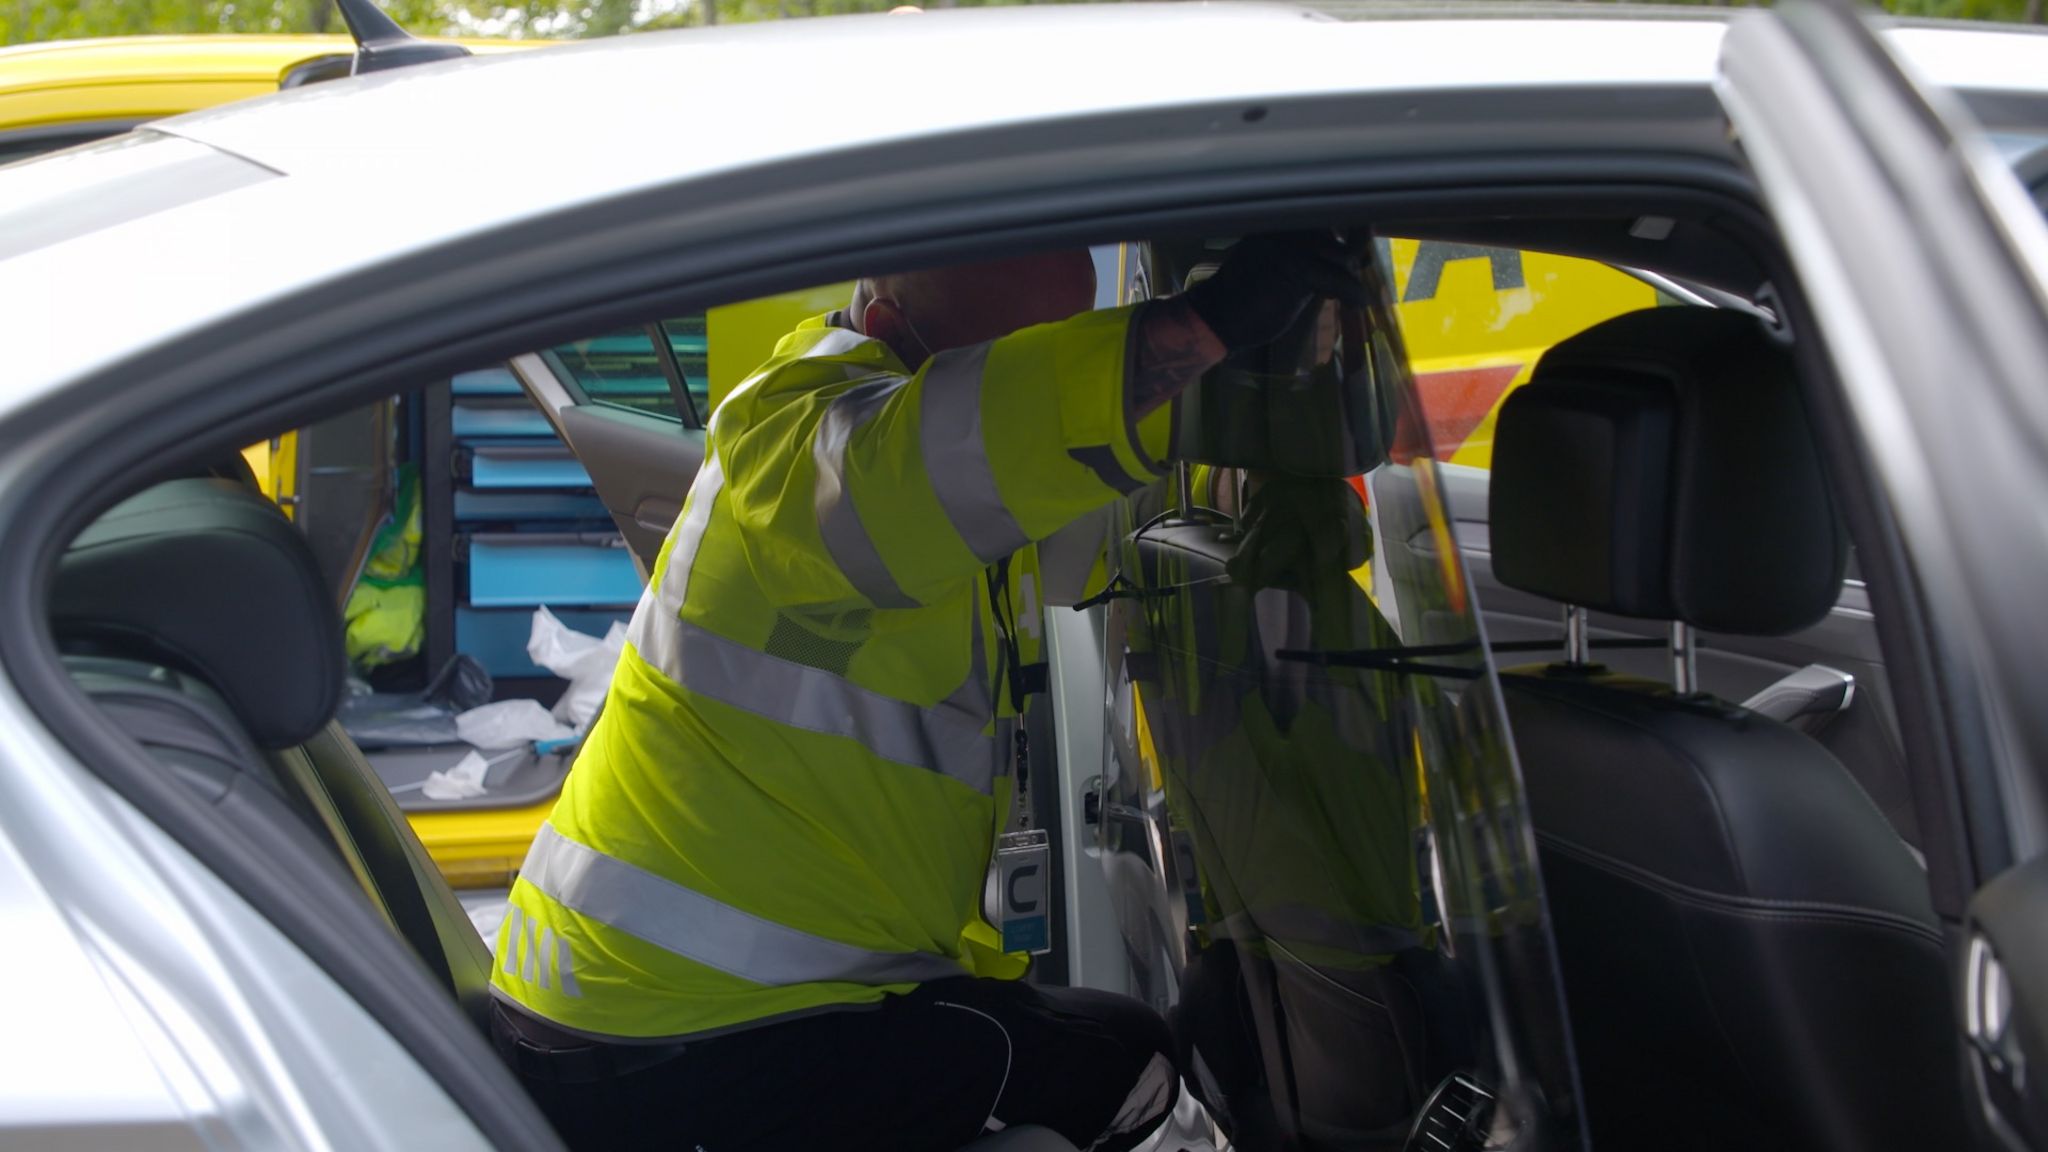 An AA engineer installing a perspex screen in a taxi